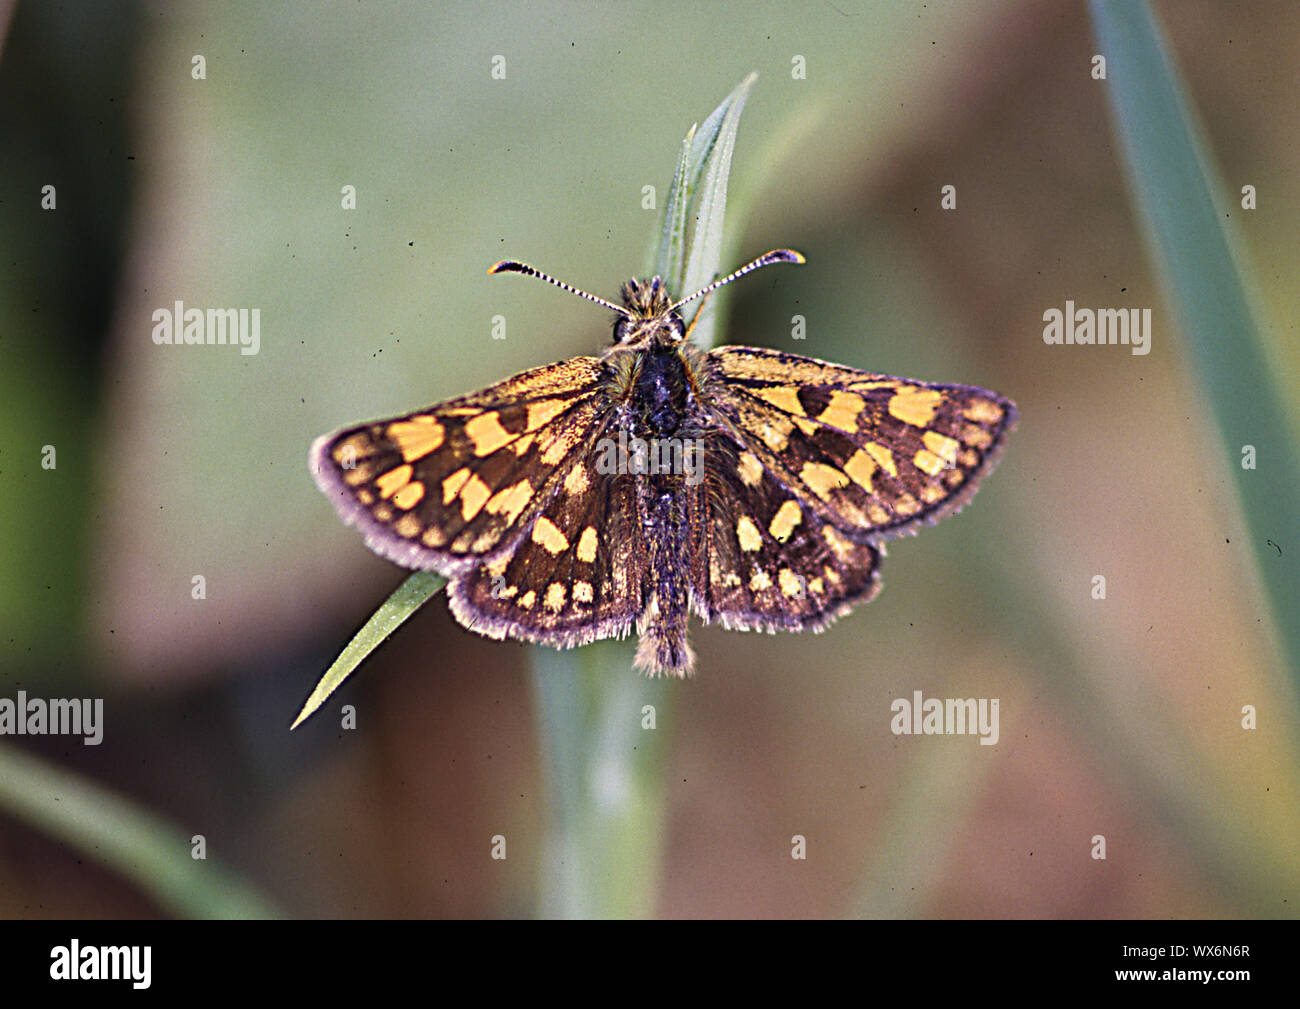 Thickhead butterfly on blade of grass Stock Photo